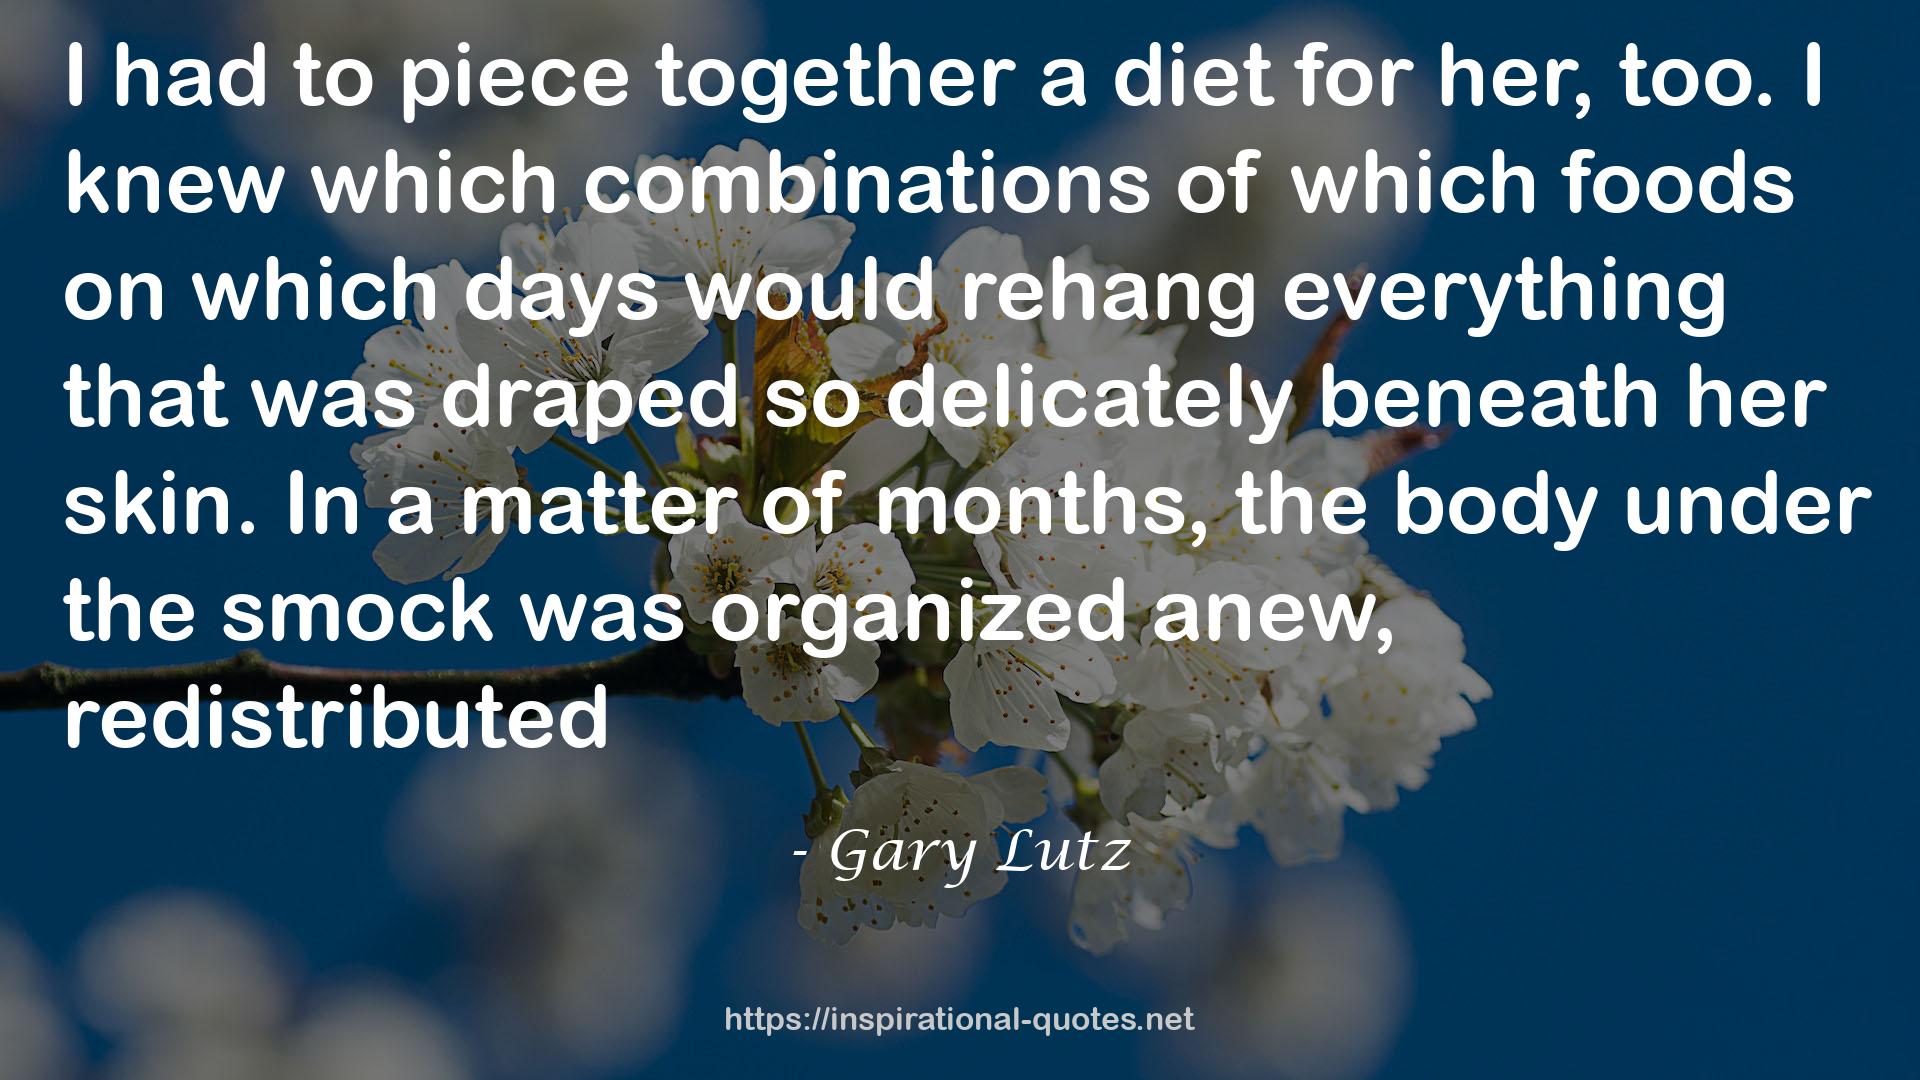 Gary Lutz QUOTES